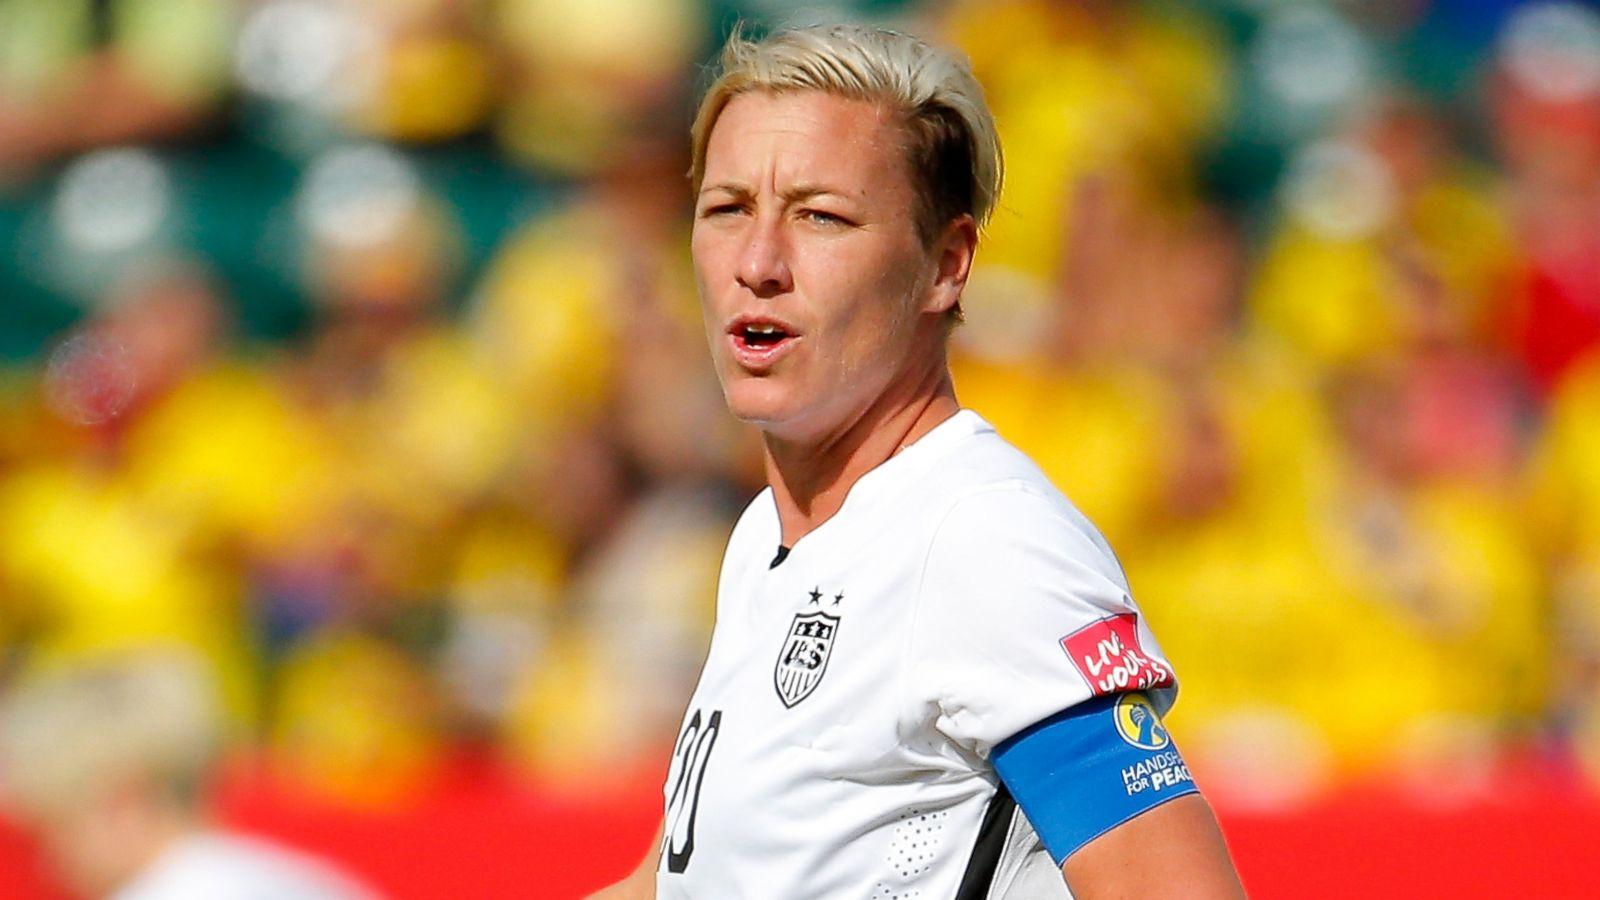 Abby Wambach Says She Is 'Embarrassed and Ashamed' By DUI Arrest